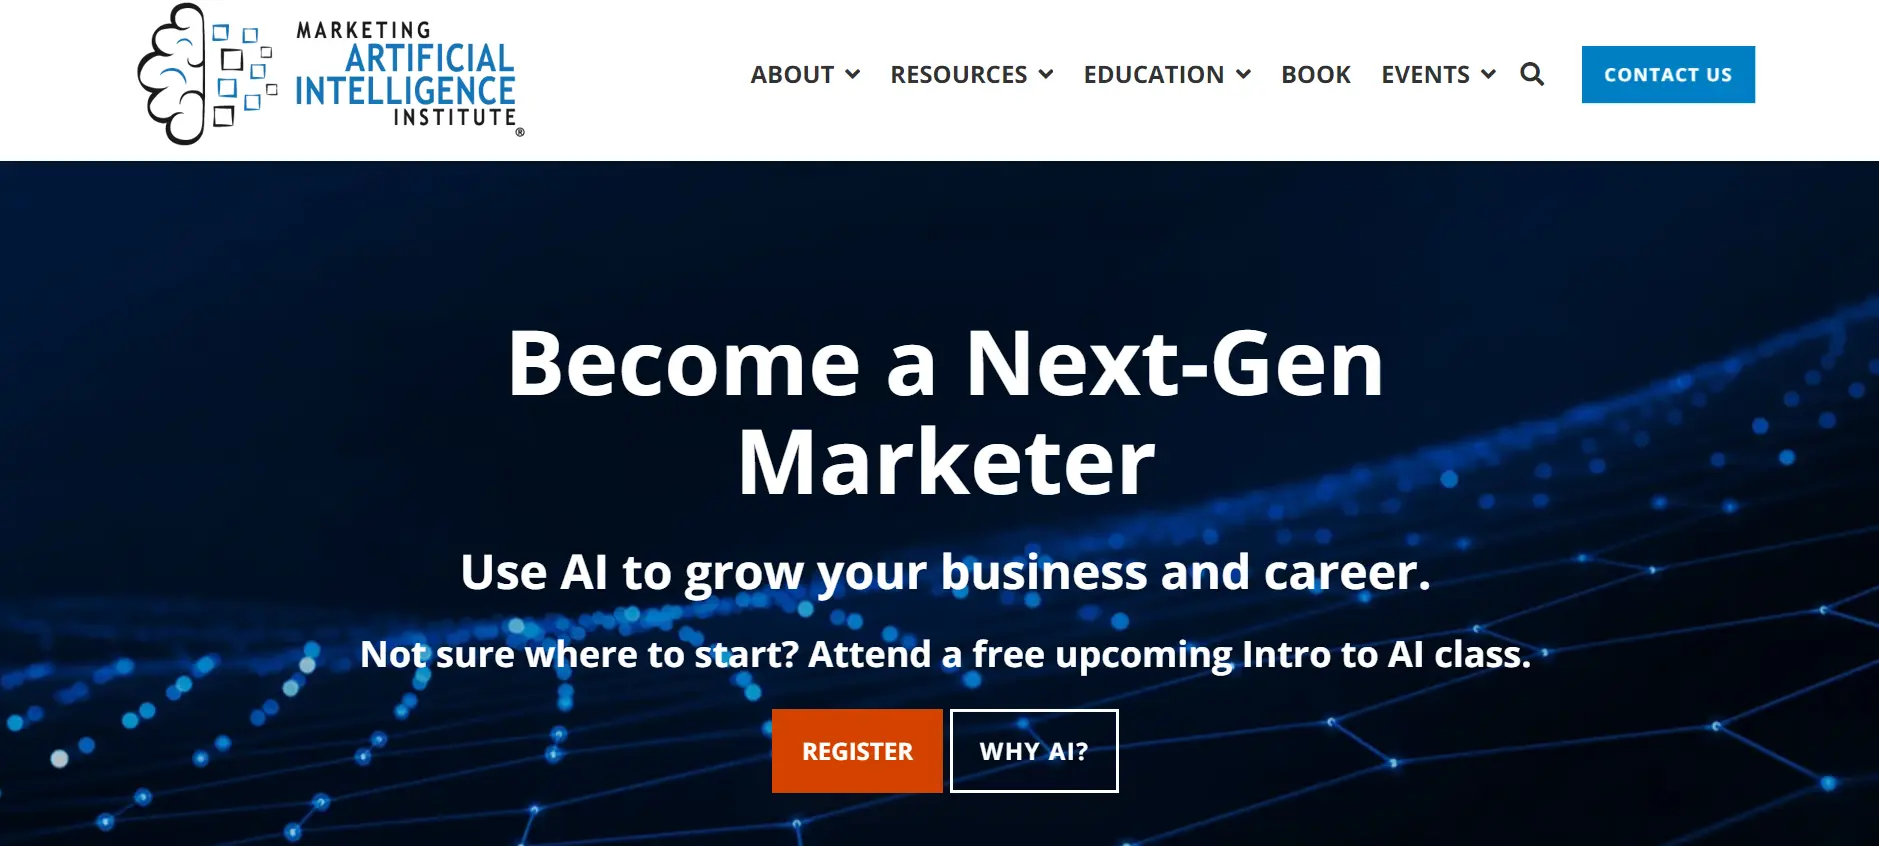 AI Tools from Marketing AI Institute